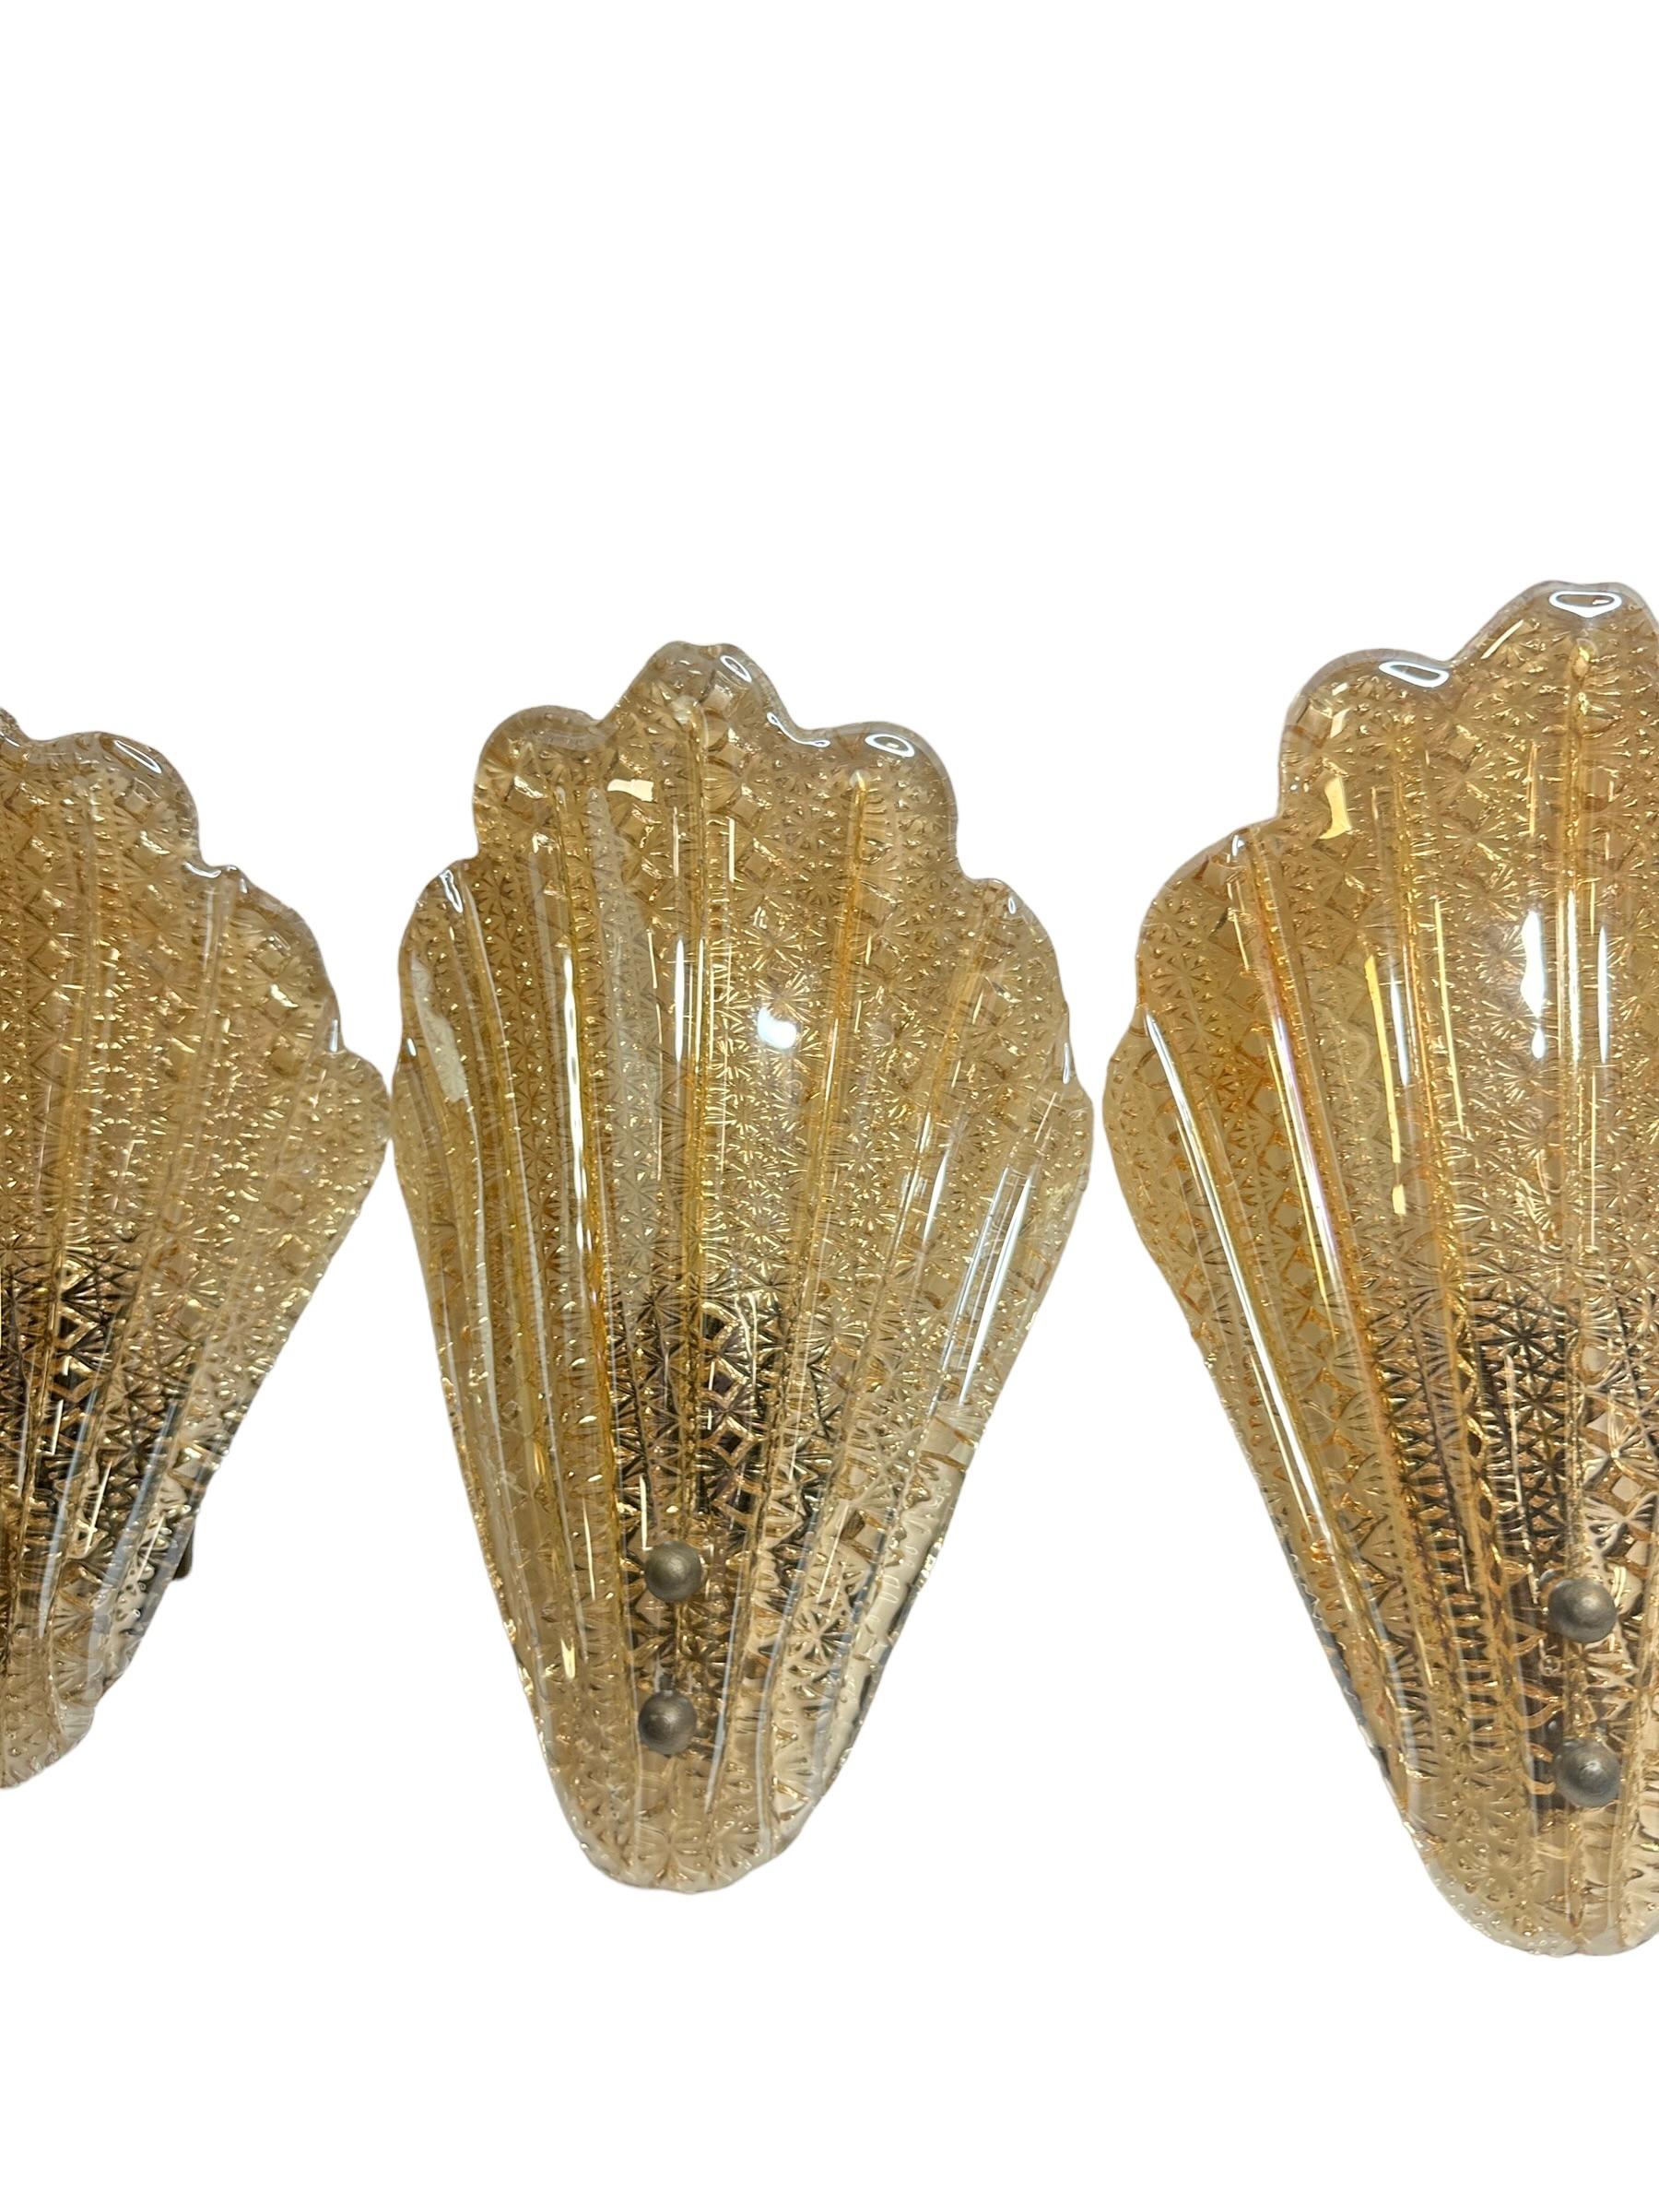 Mid-Century Modern Stunning Set of Three Murano Glass Leaf Sconces by Barovier and Toso, Italy For Sale